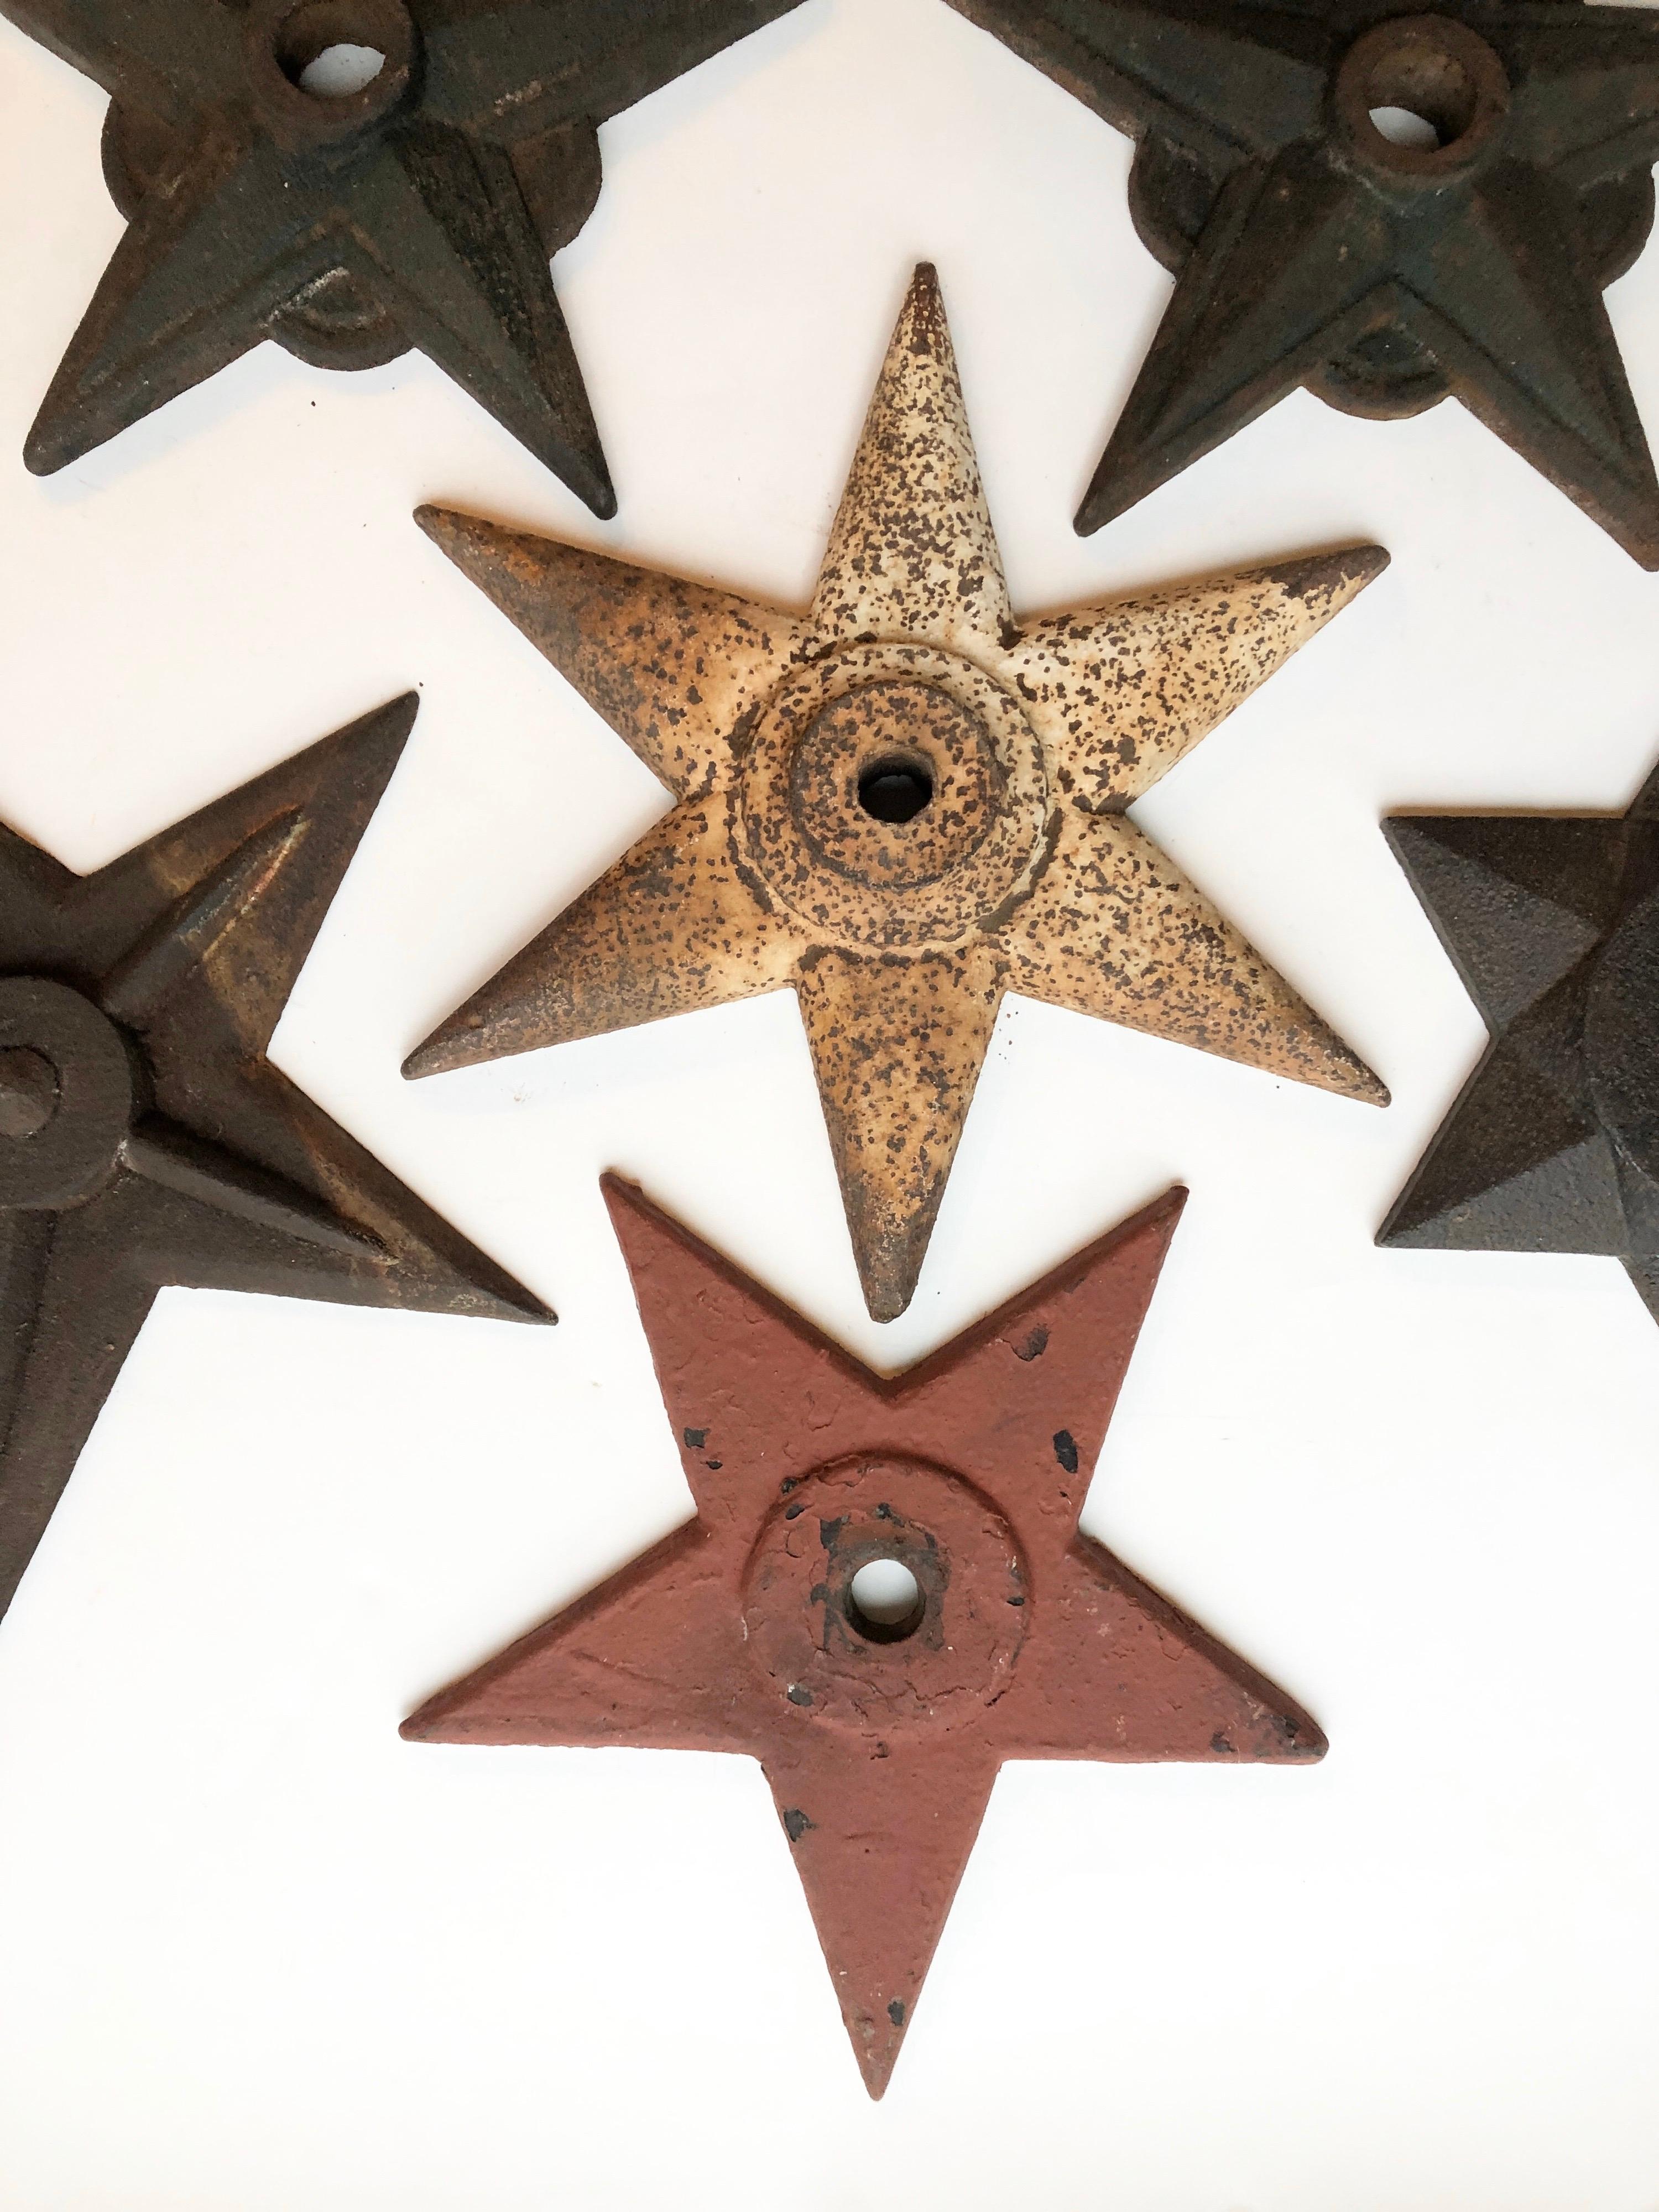 A collection of 7 antique 19th century cast iron decorative star shaped building supports. Used in early brick building construction. Support rods would run the width of a building, capped off with a decorative shaped star that would act as a giant